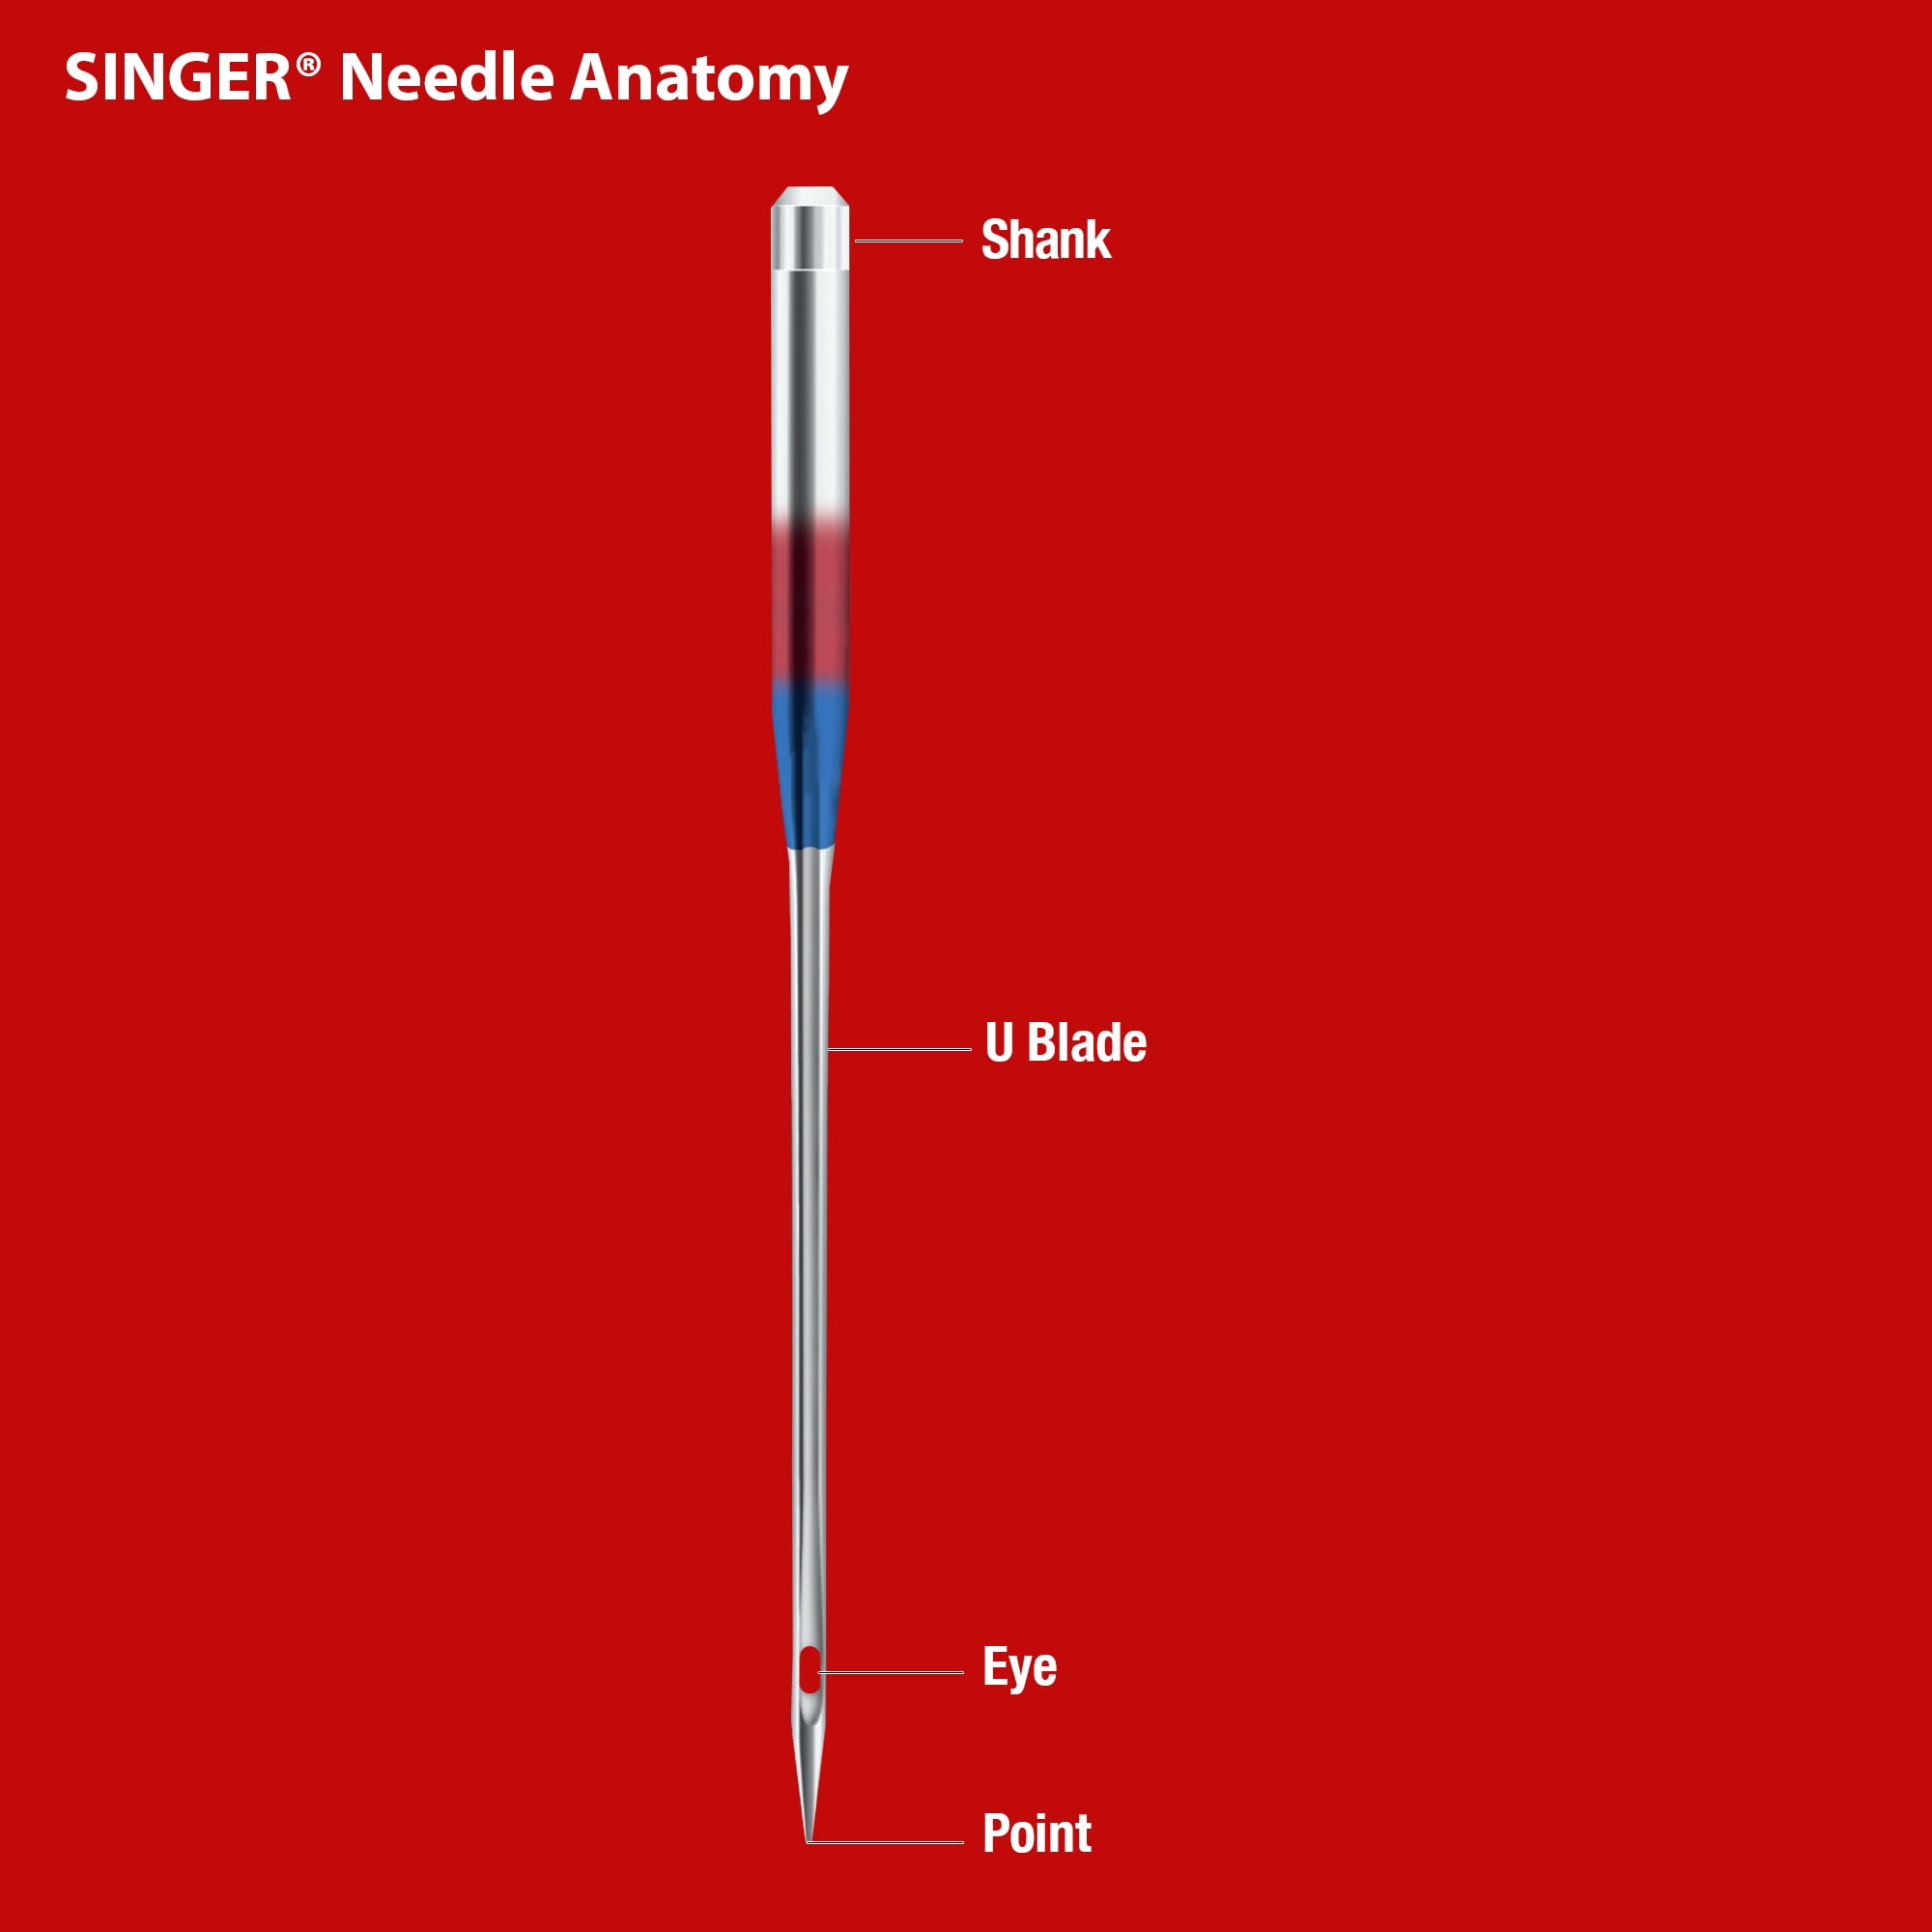 Singer Size 18 Top Stitch Sewing Machine Needles (5 Pack)